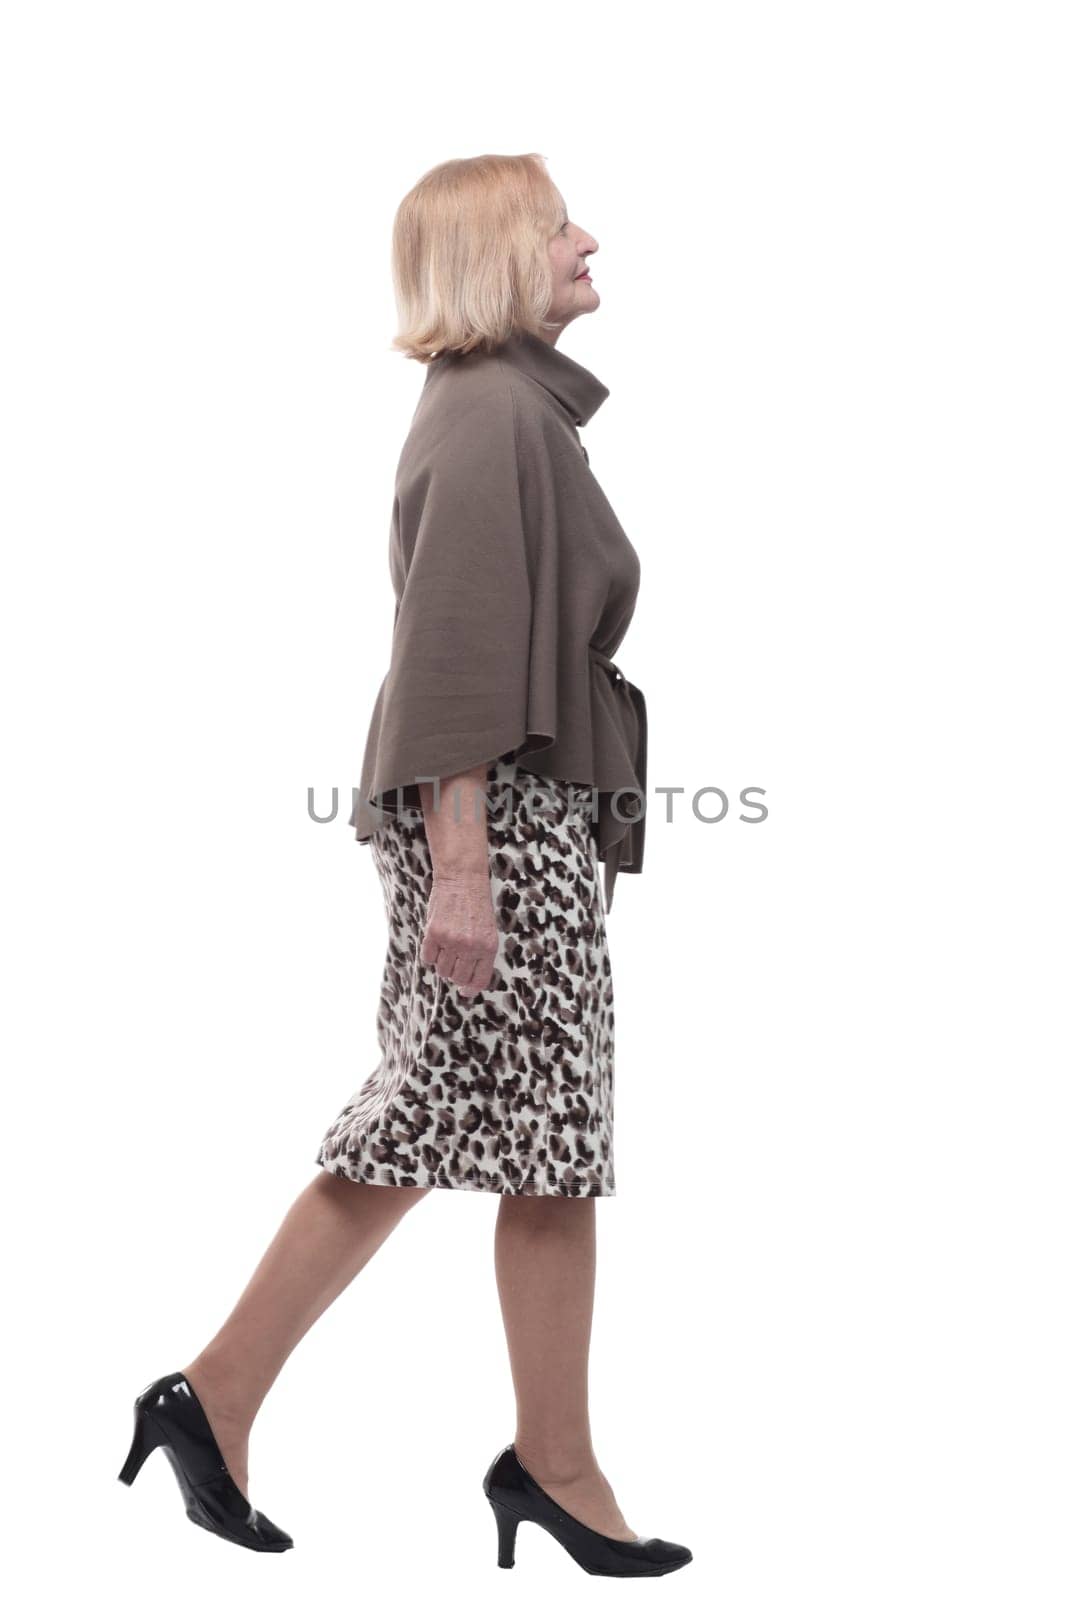 adult woman in a fashionable blouse striding forward . isolated on a white background.